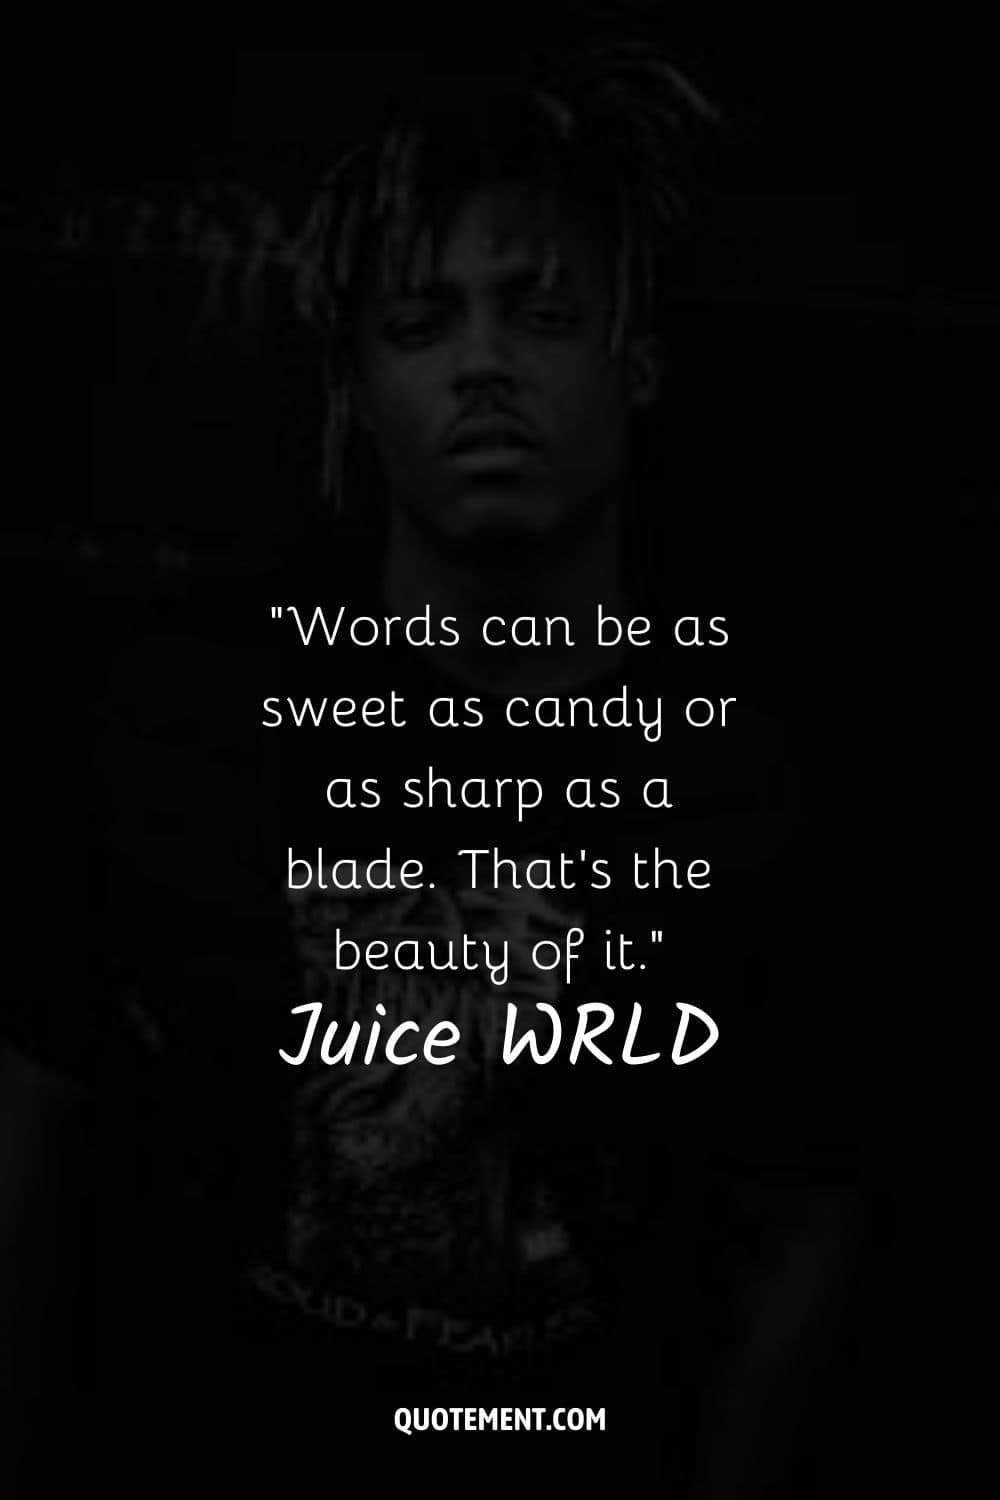 Words can be as sweet as candy or as sharp as a blade. That’s the beauty of it